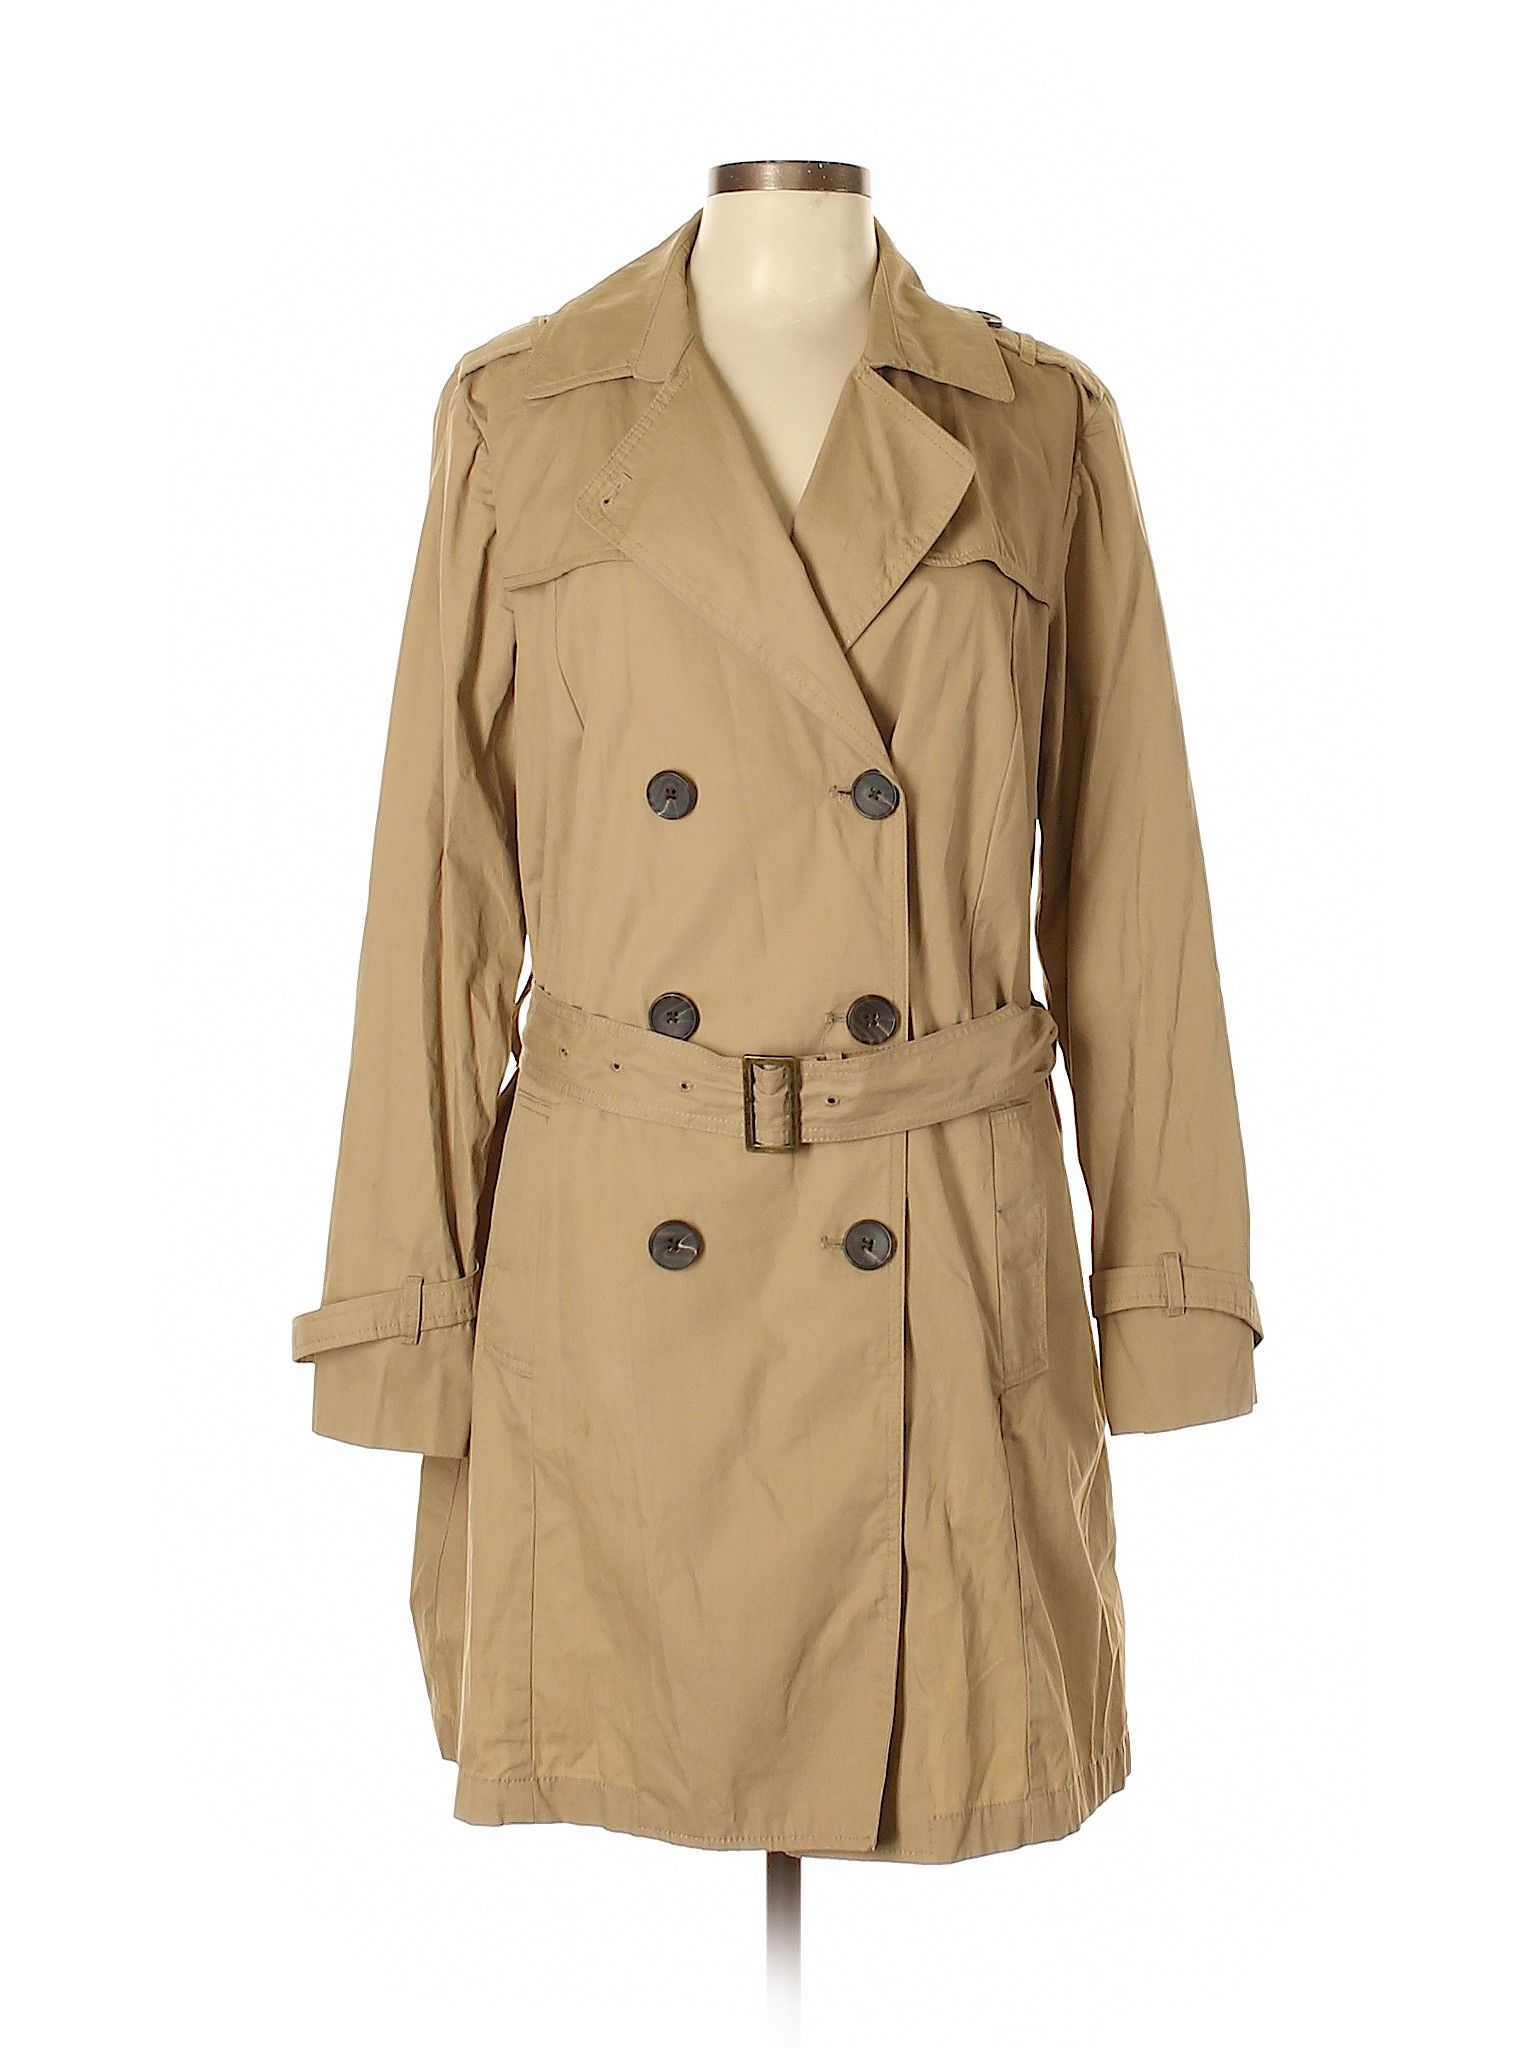 Gap Outlet Trenchcoat Size 12: Tan Women's Jackets & Outerwear - 44959123 | thredUP